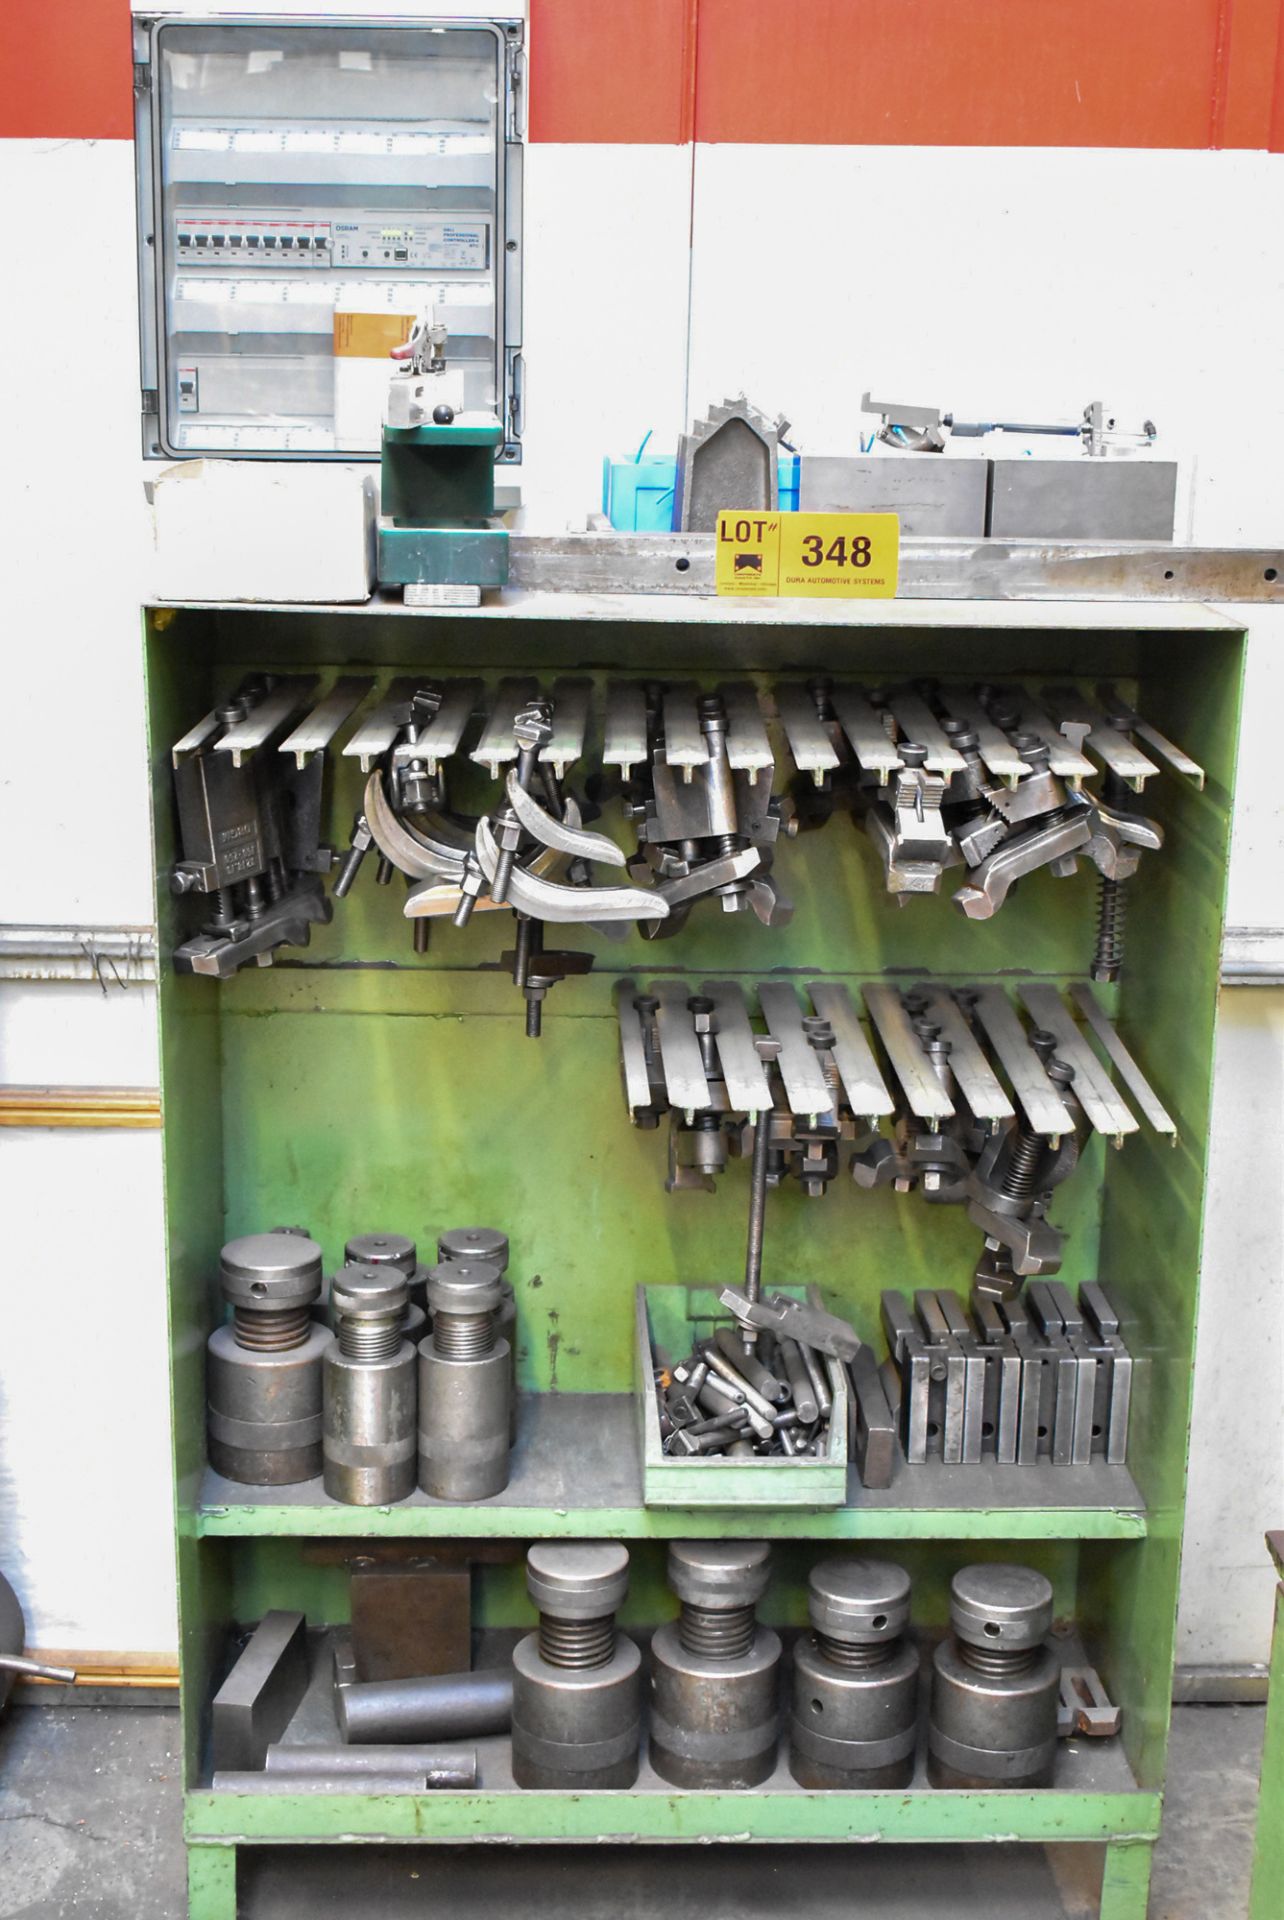 LOT/ PRESS HOLD DOWN CLAMPING TOOLING (BAU 55) [Removal Fee = € 27.50 + applicable VAT - Gerritsen